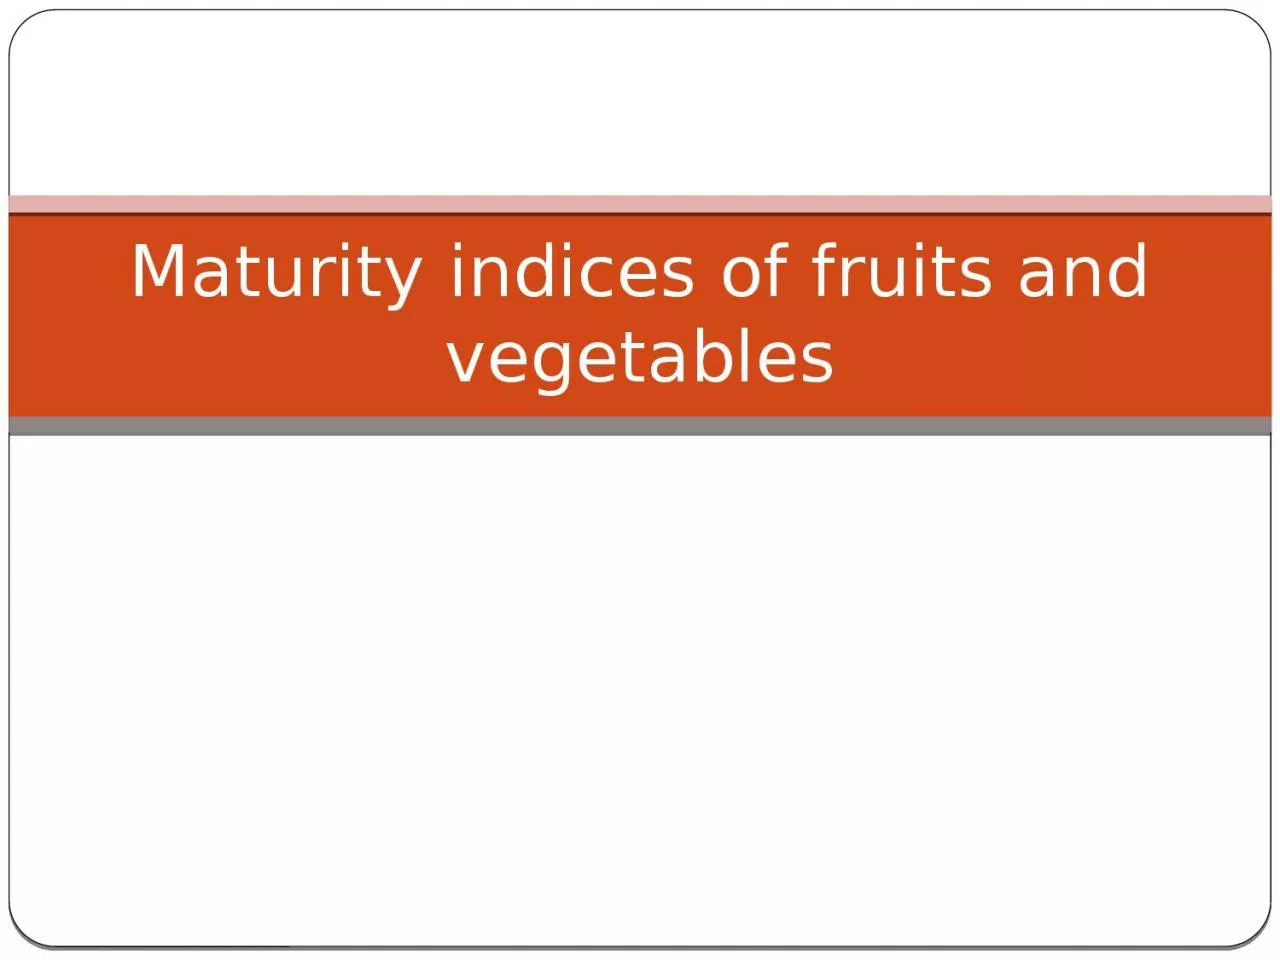 Maturity indices of fruits and vegetables